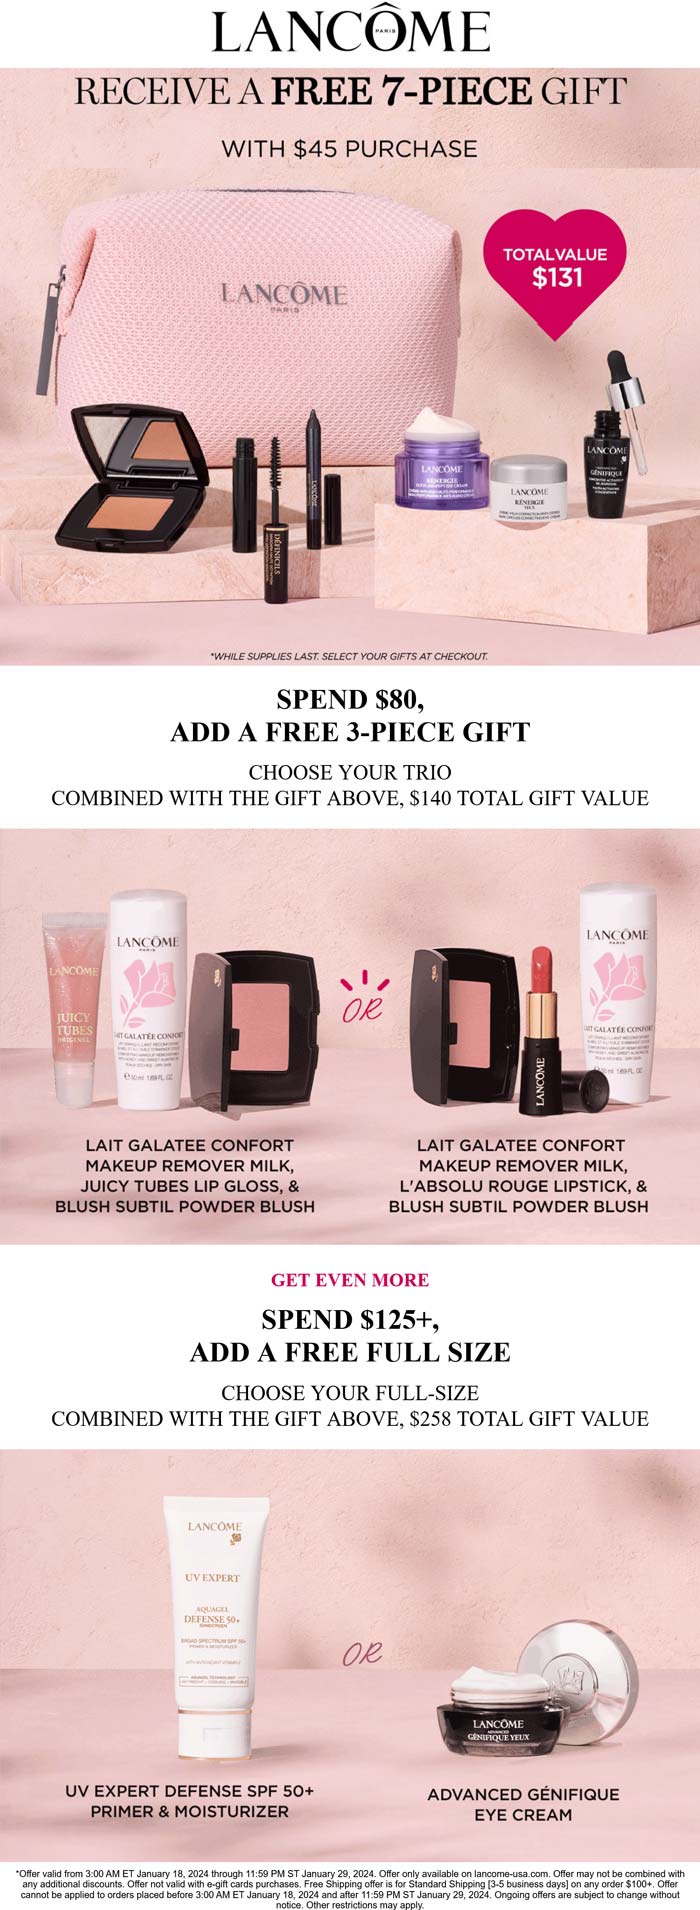 Lancome stores Coupon  Free 7pc on $45, 10pc on $80 & another full size on $125 at Lancome #lancome 